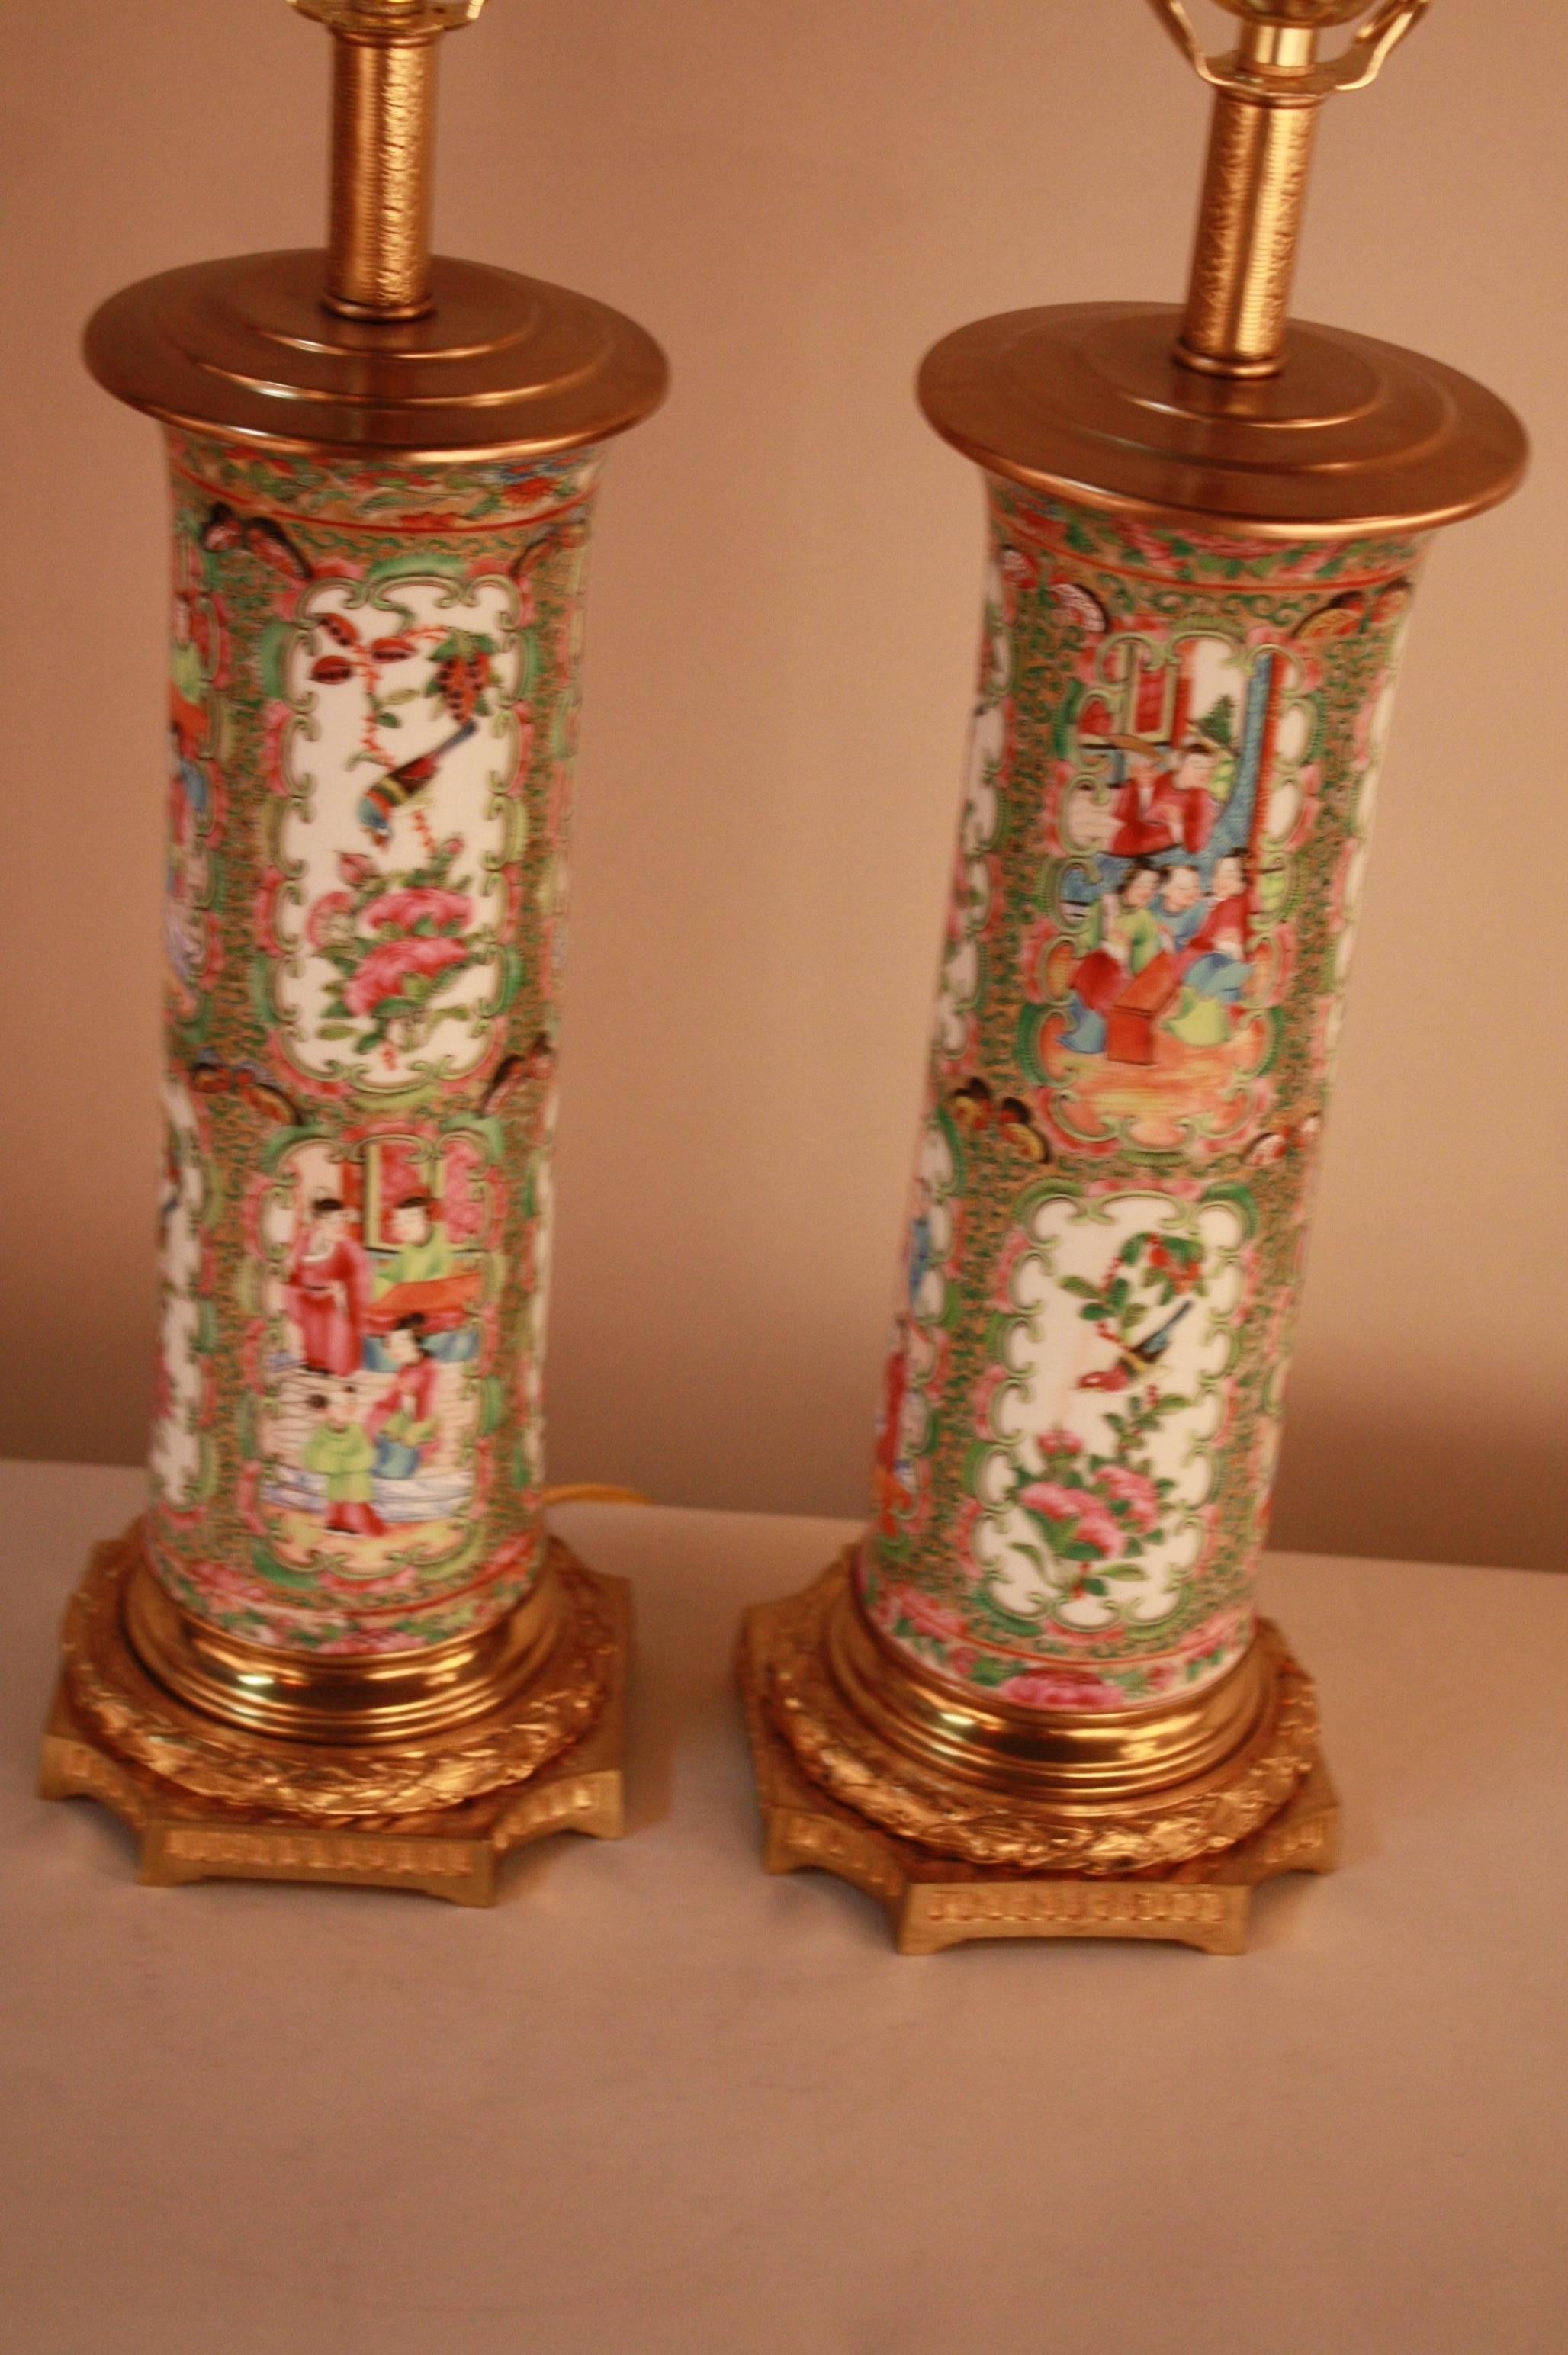 Pair of 19th century hand-painted rose medallion imported porcelain vases that have been mounted with French bronze bases.
These lamps are fitted with silk lampshades.